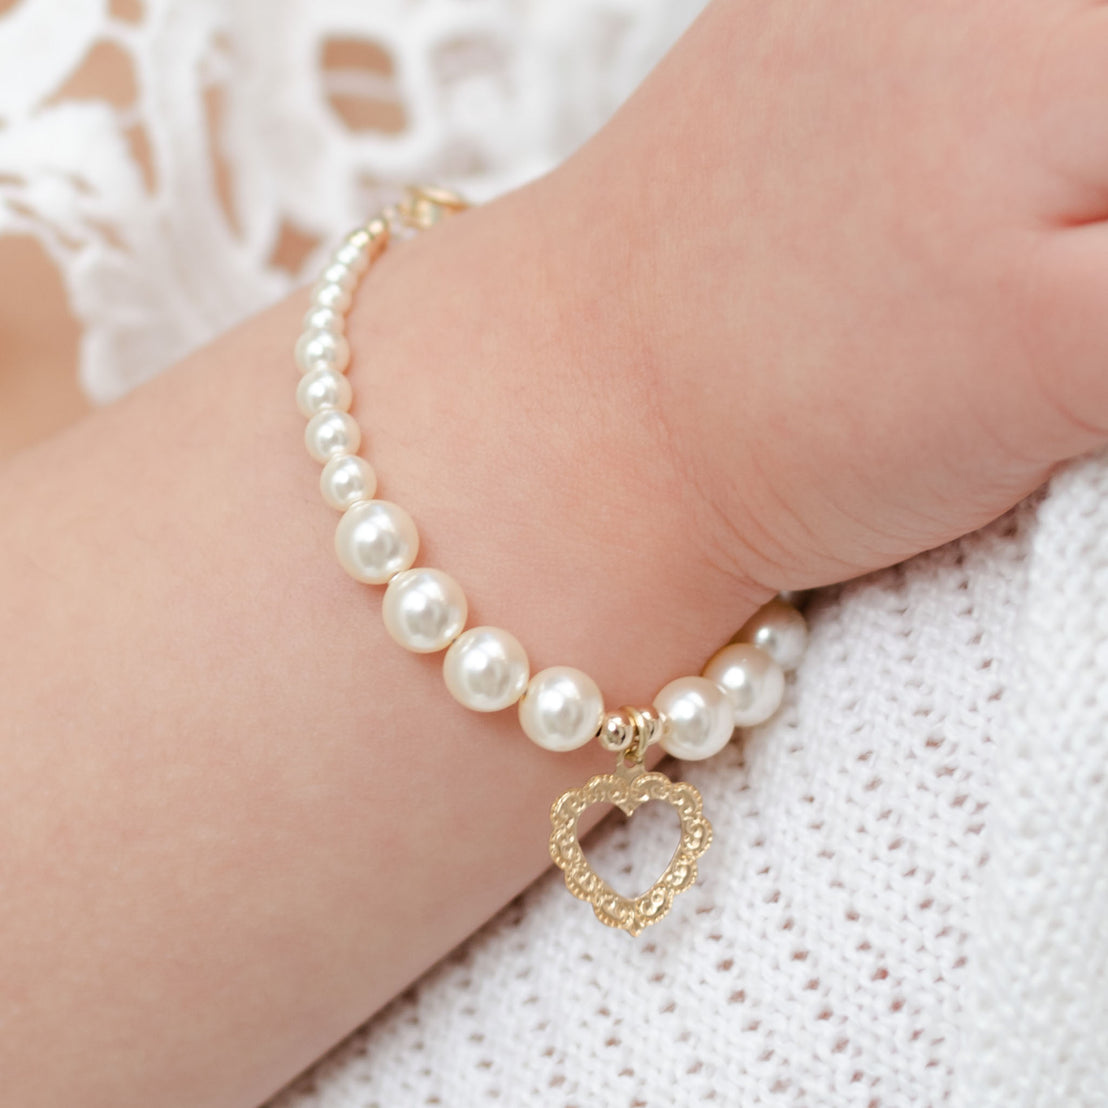 Close-up of a woman's wrist wearing a Cream Luster Pearl Bracelet with 14k Gold Heart Charm, against a soft white lace and fabric background at a baby shower.